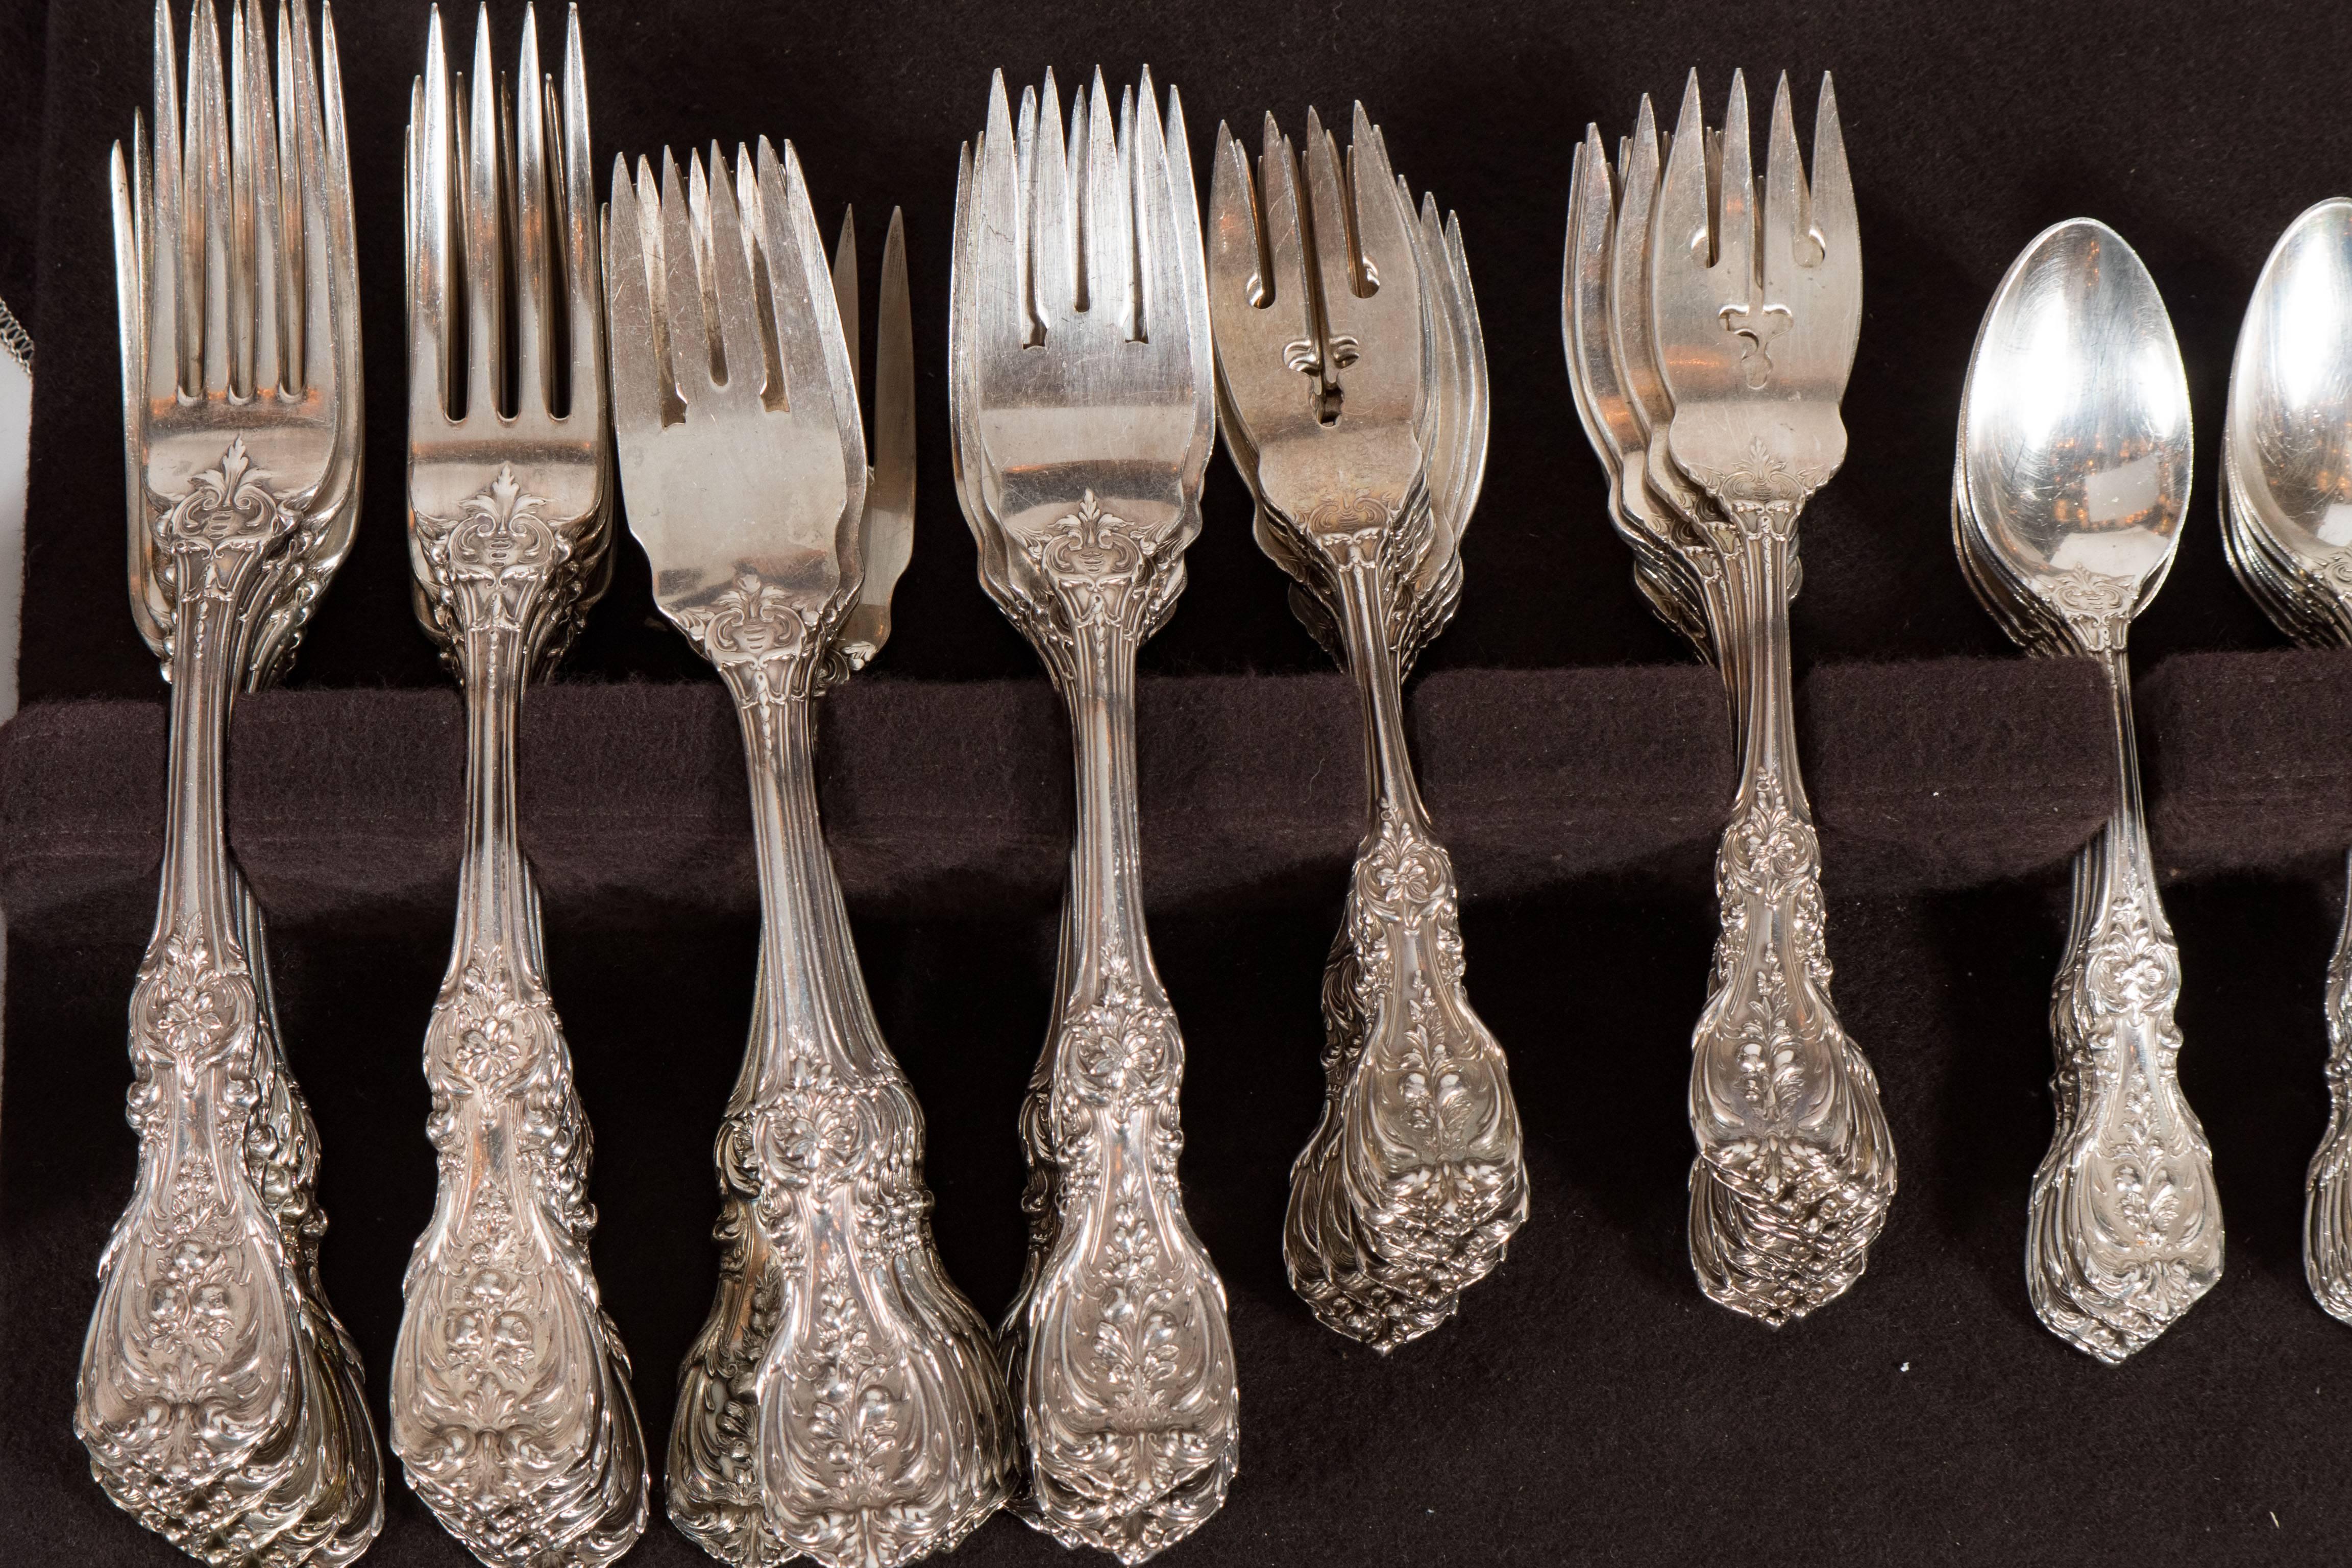 205 Piece Sterling Flatware Service Designed by Ernest Meyers for Reed & Barton 1